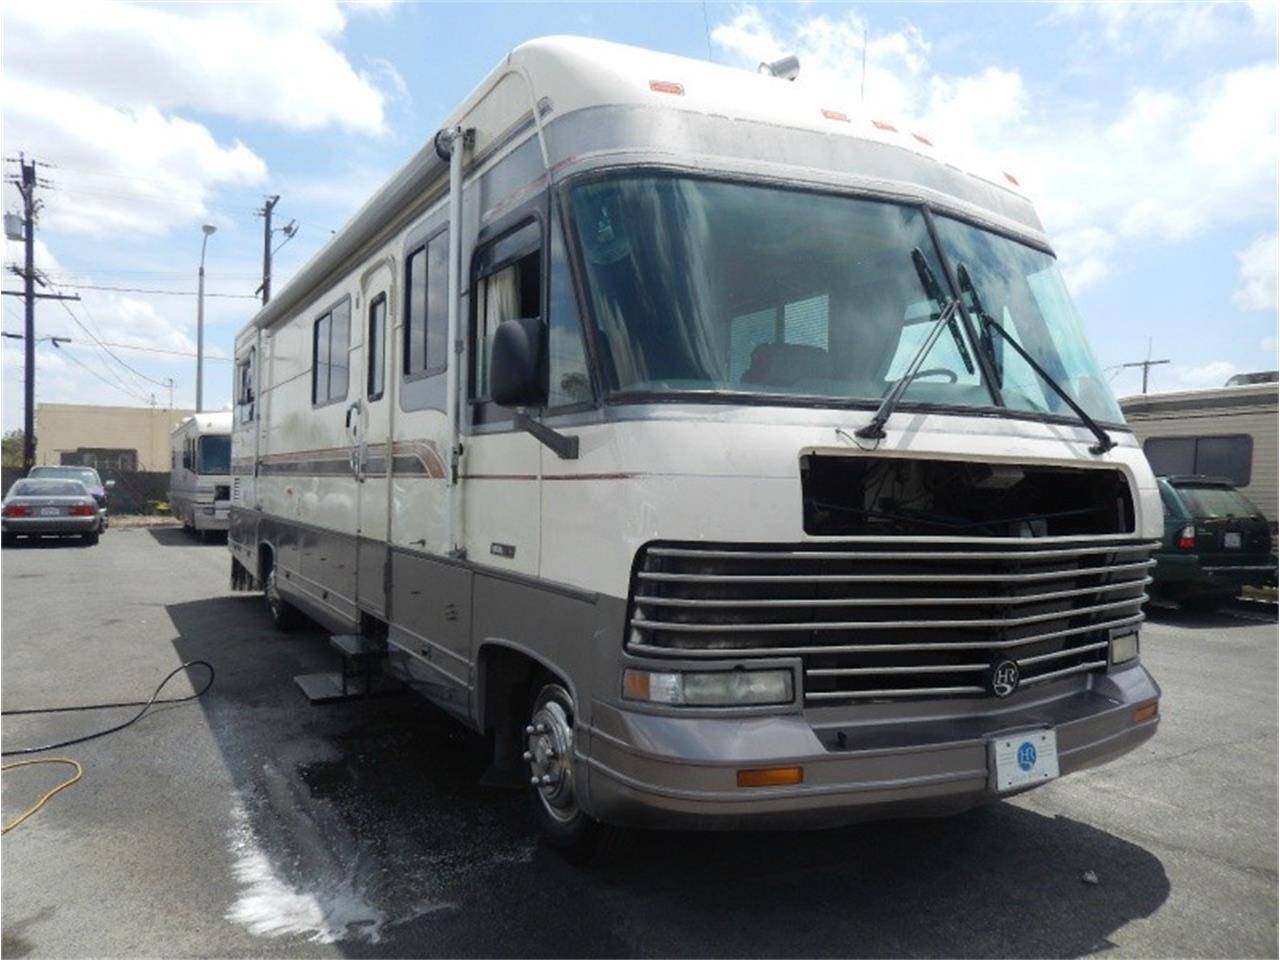 1993 Holiday Rambler IMPERIAL 36 for Sale | ClassicCars.com | CC-879821